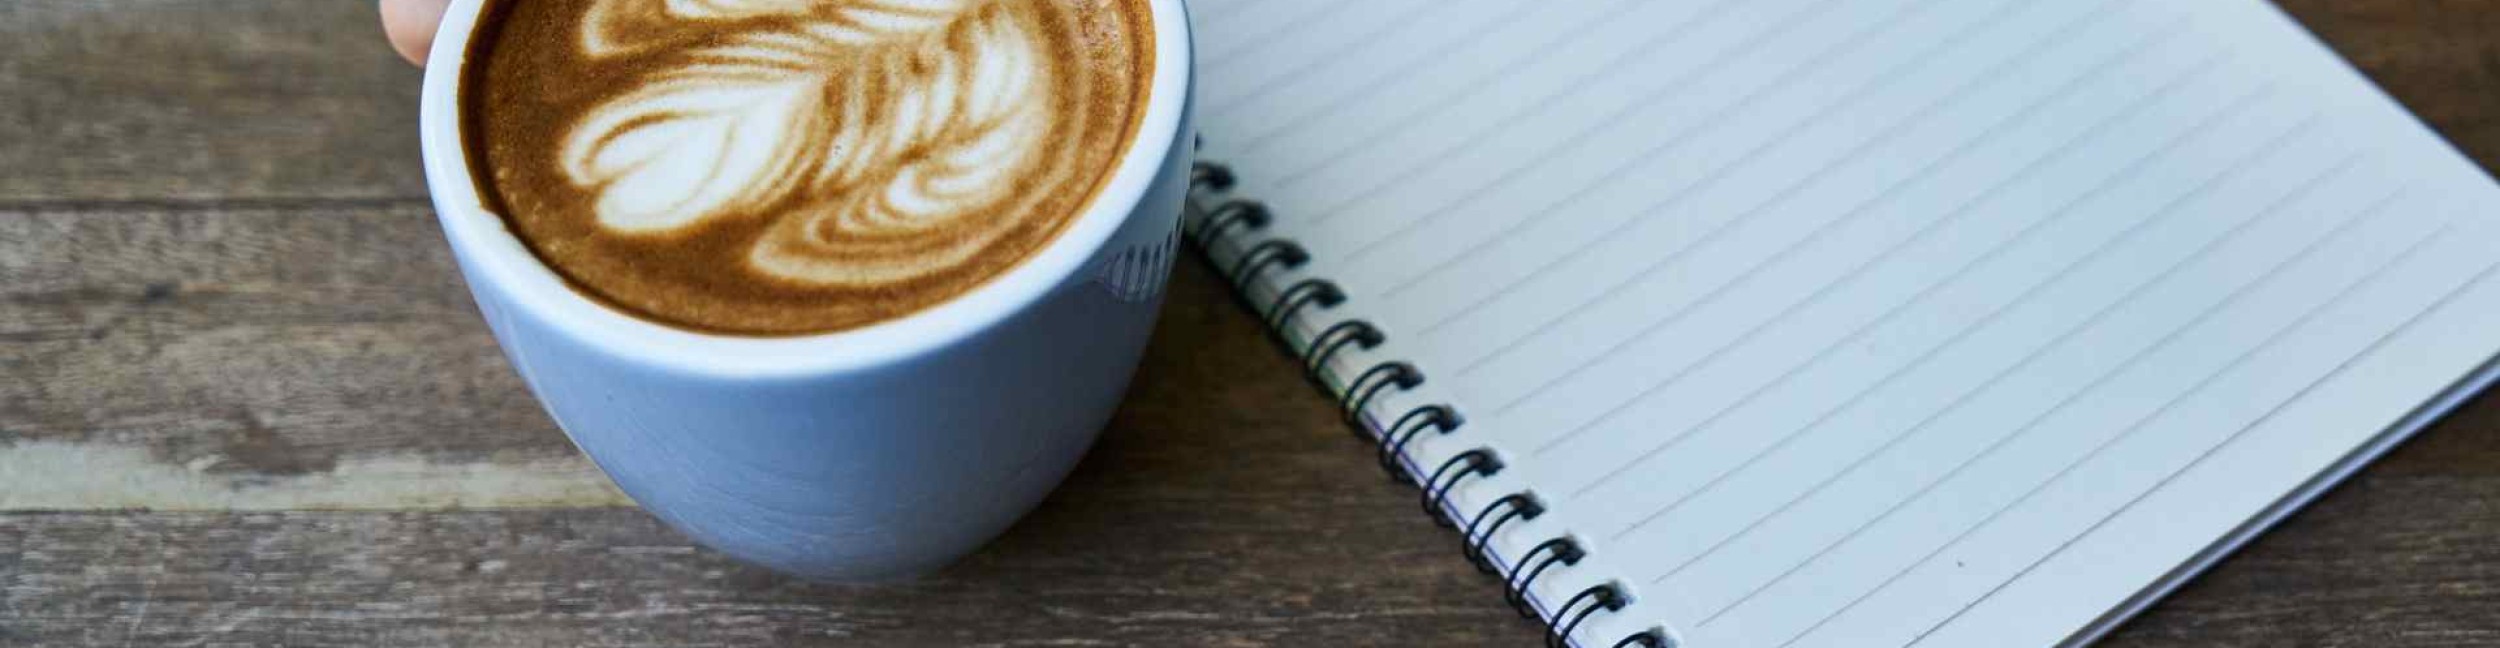 A cup of coffee and a writing pad with lines on a wooden table, one hand holding the cup by the handle